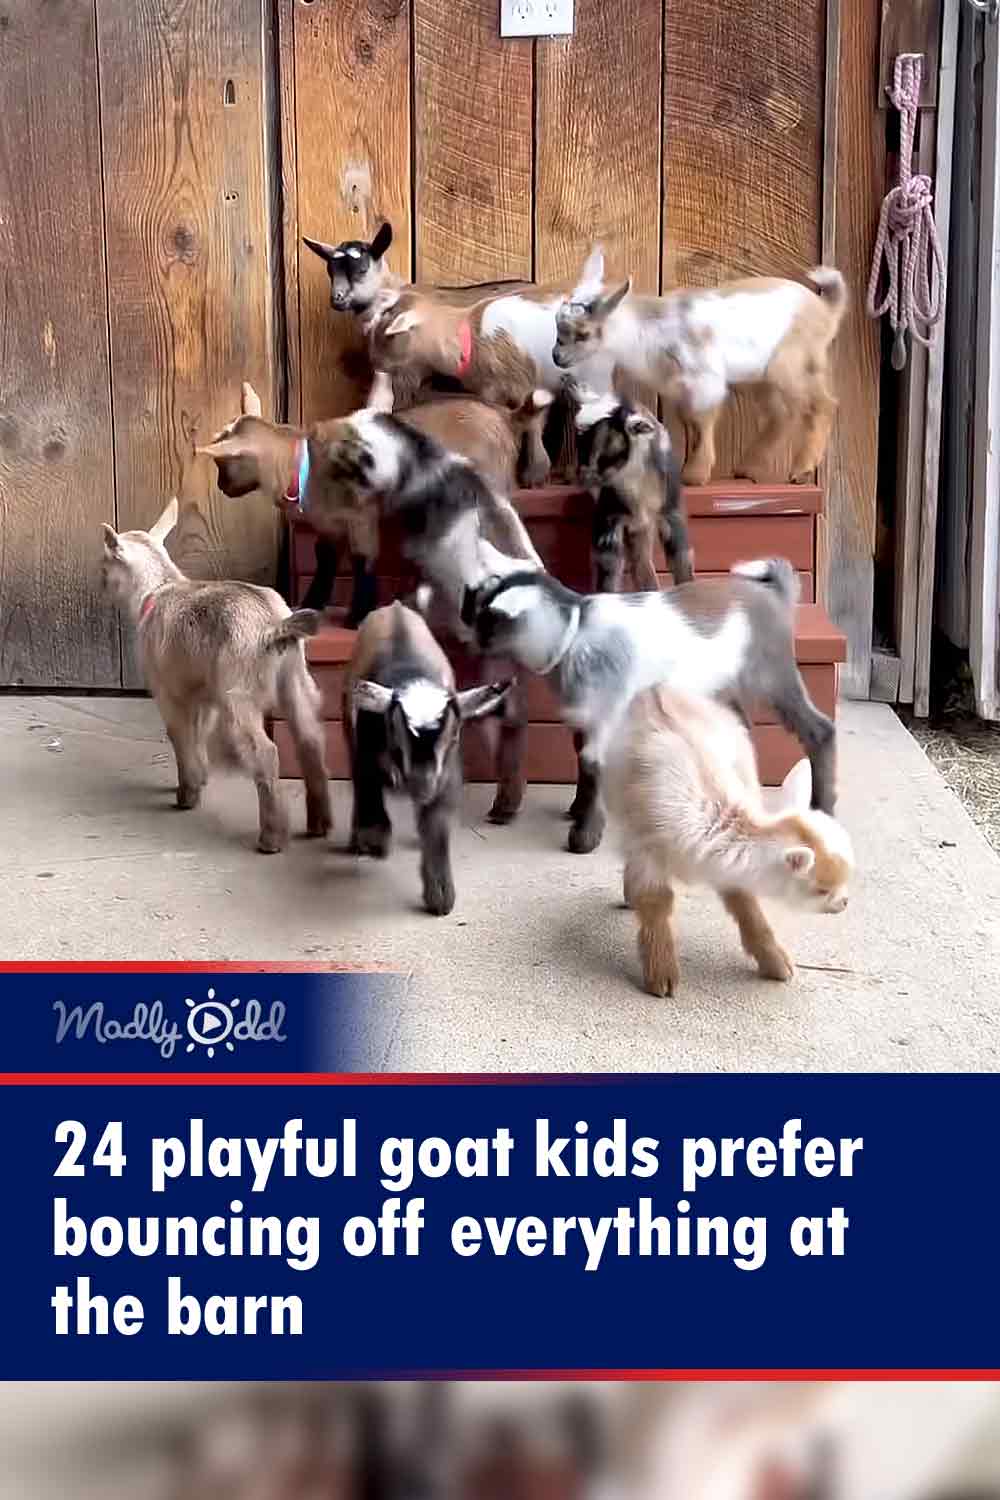 24 playful goat kids prefer bouncing off everything at the barn